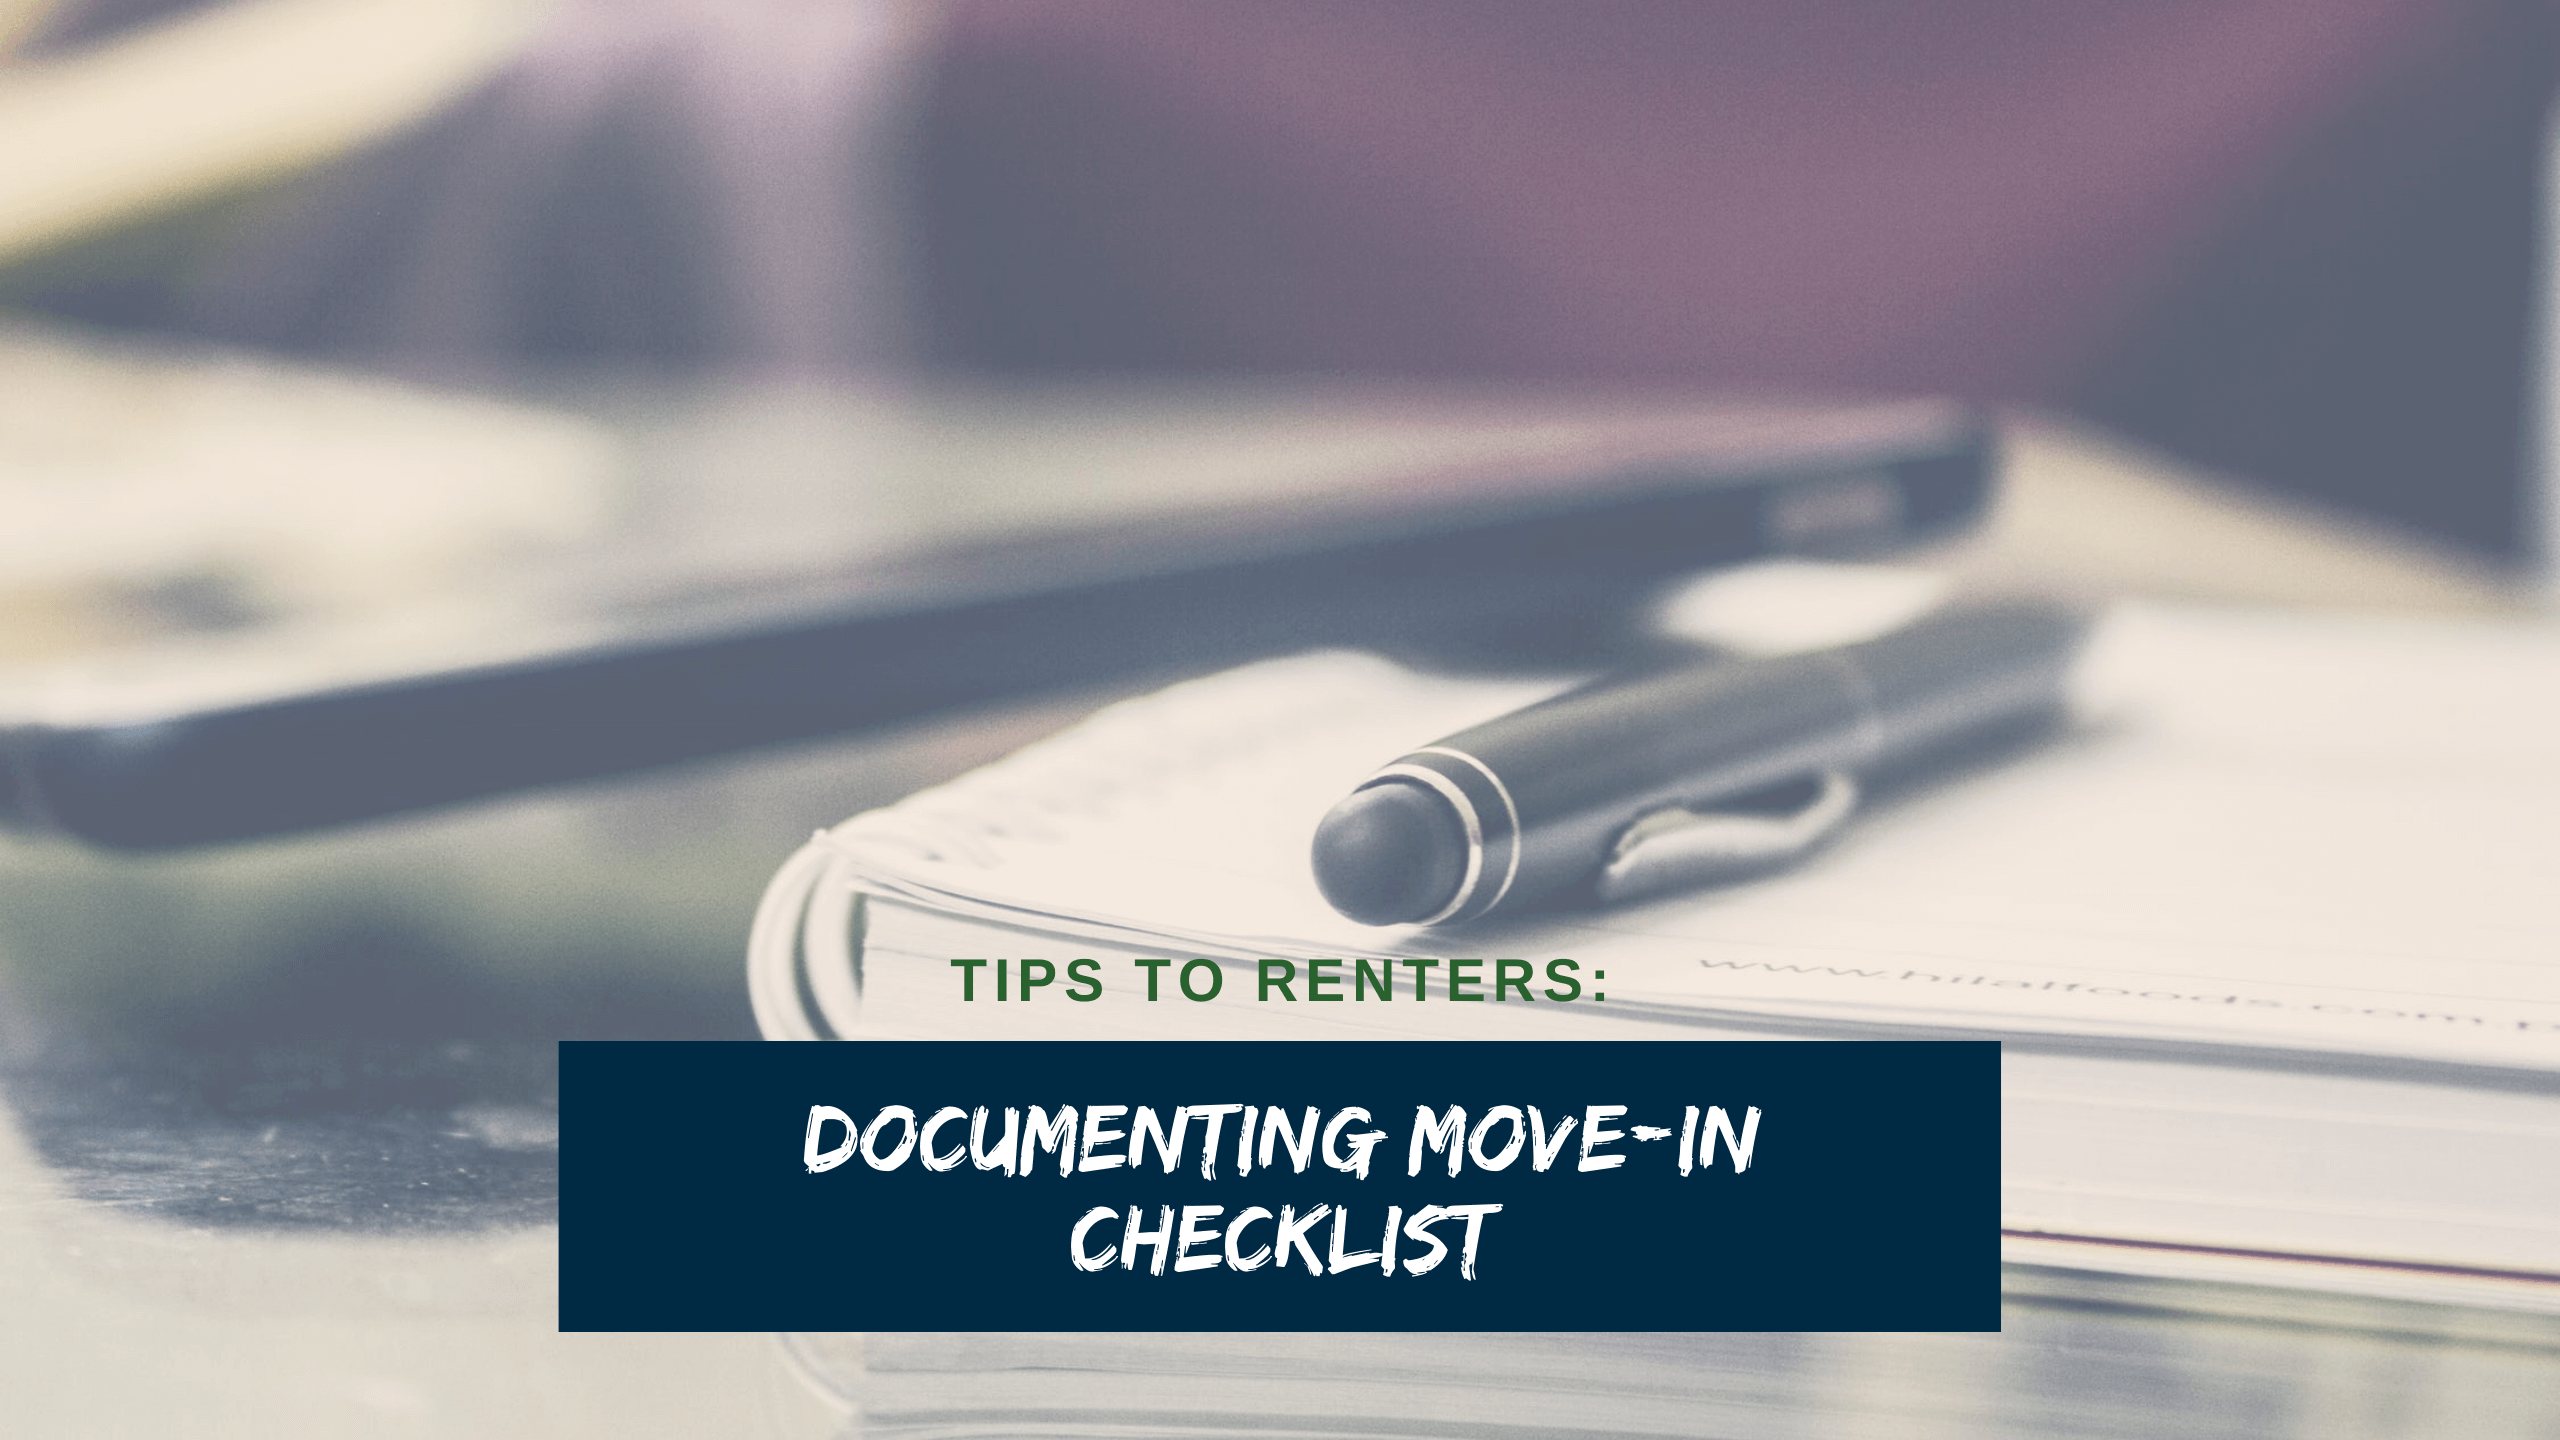 Tips to Renters: Documenting Move-in Checklist - article banner